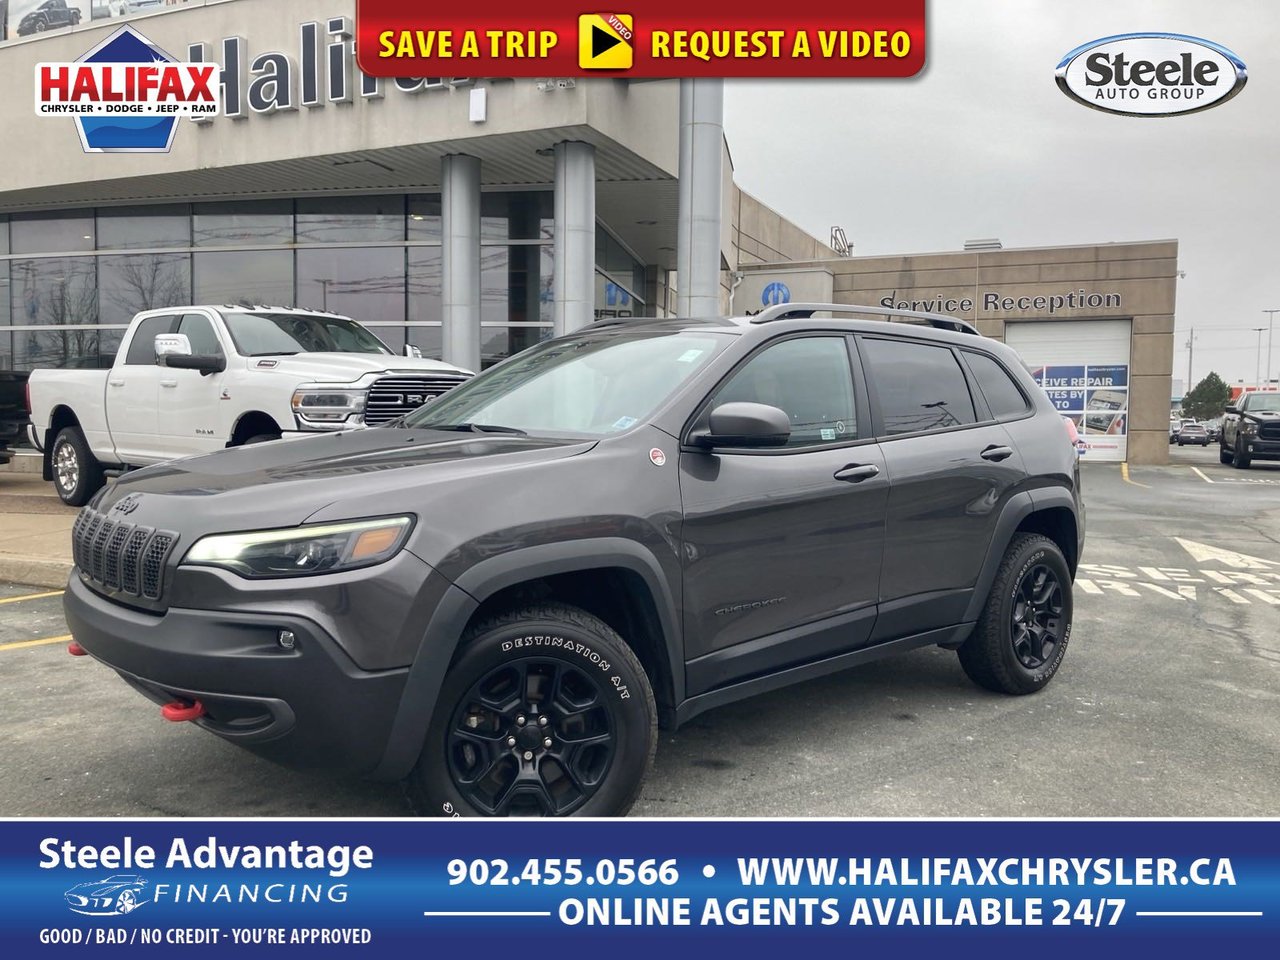 2021 Jeep Cherokee Trailhawk Elite - LOW KM, NAV, HTD MEMORY LEATHER SEATS AND WHEEL,-0